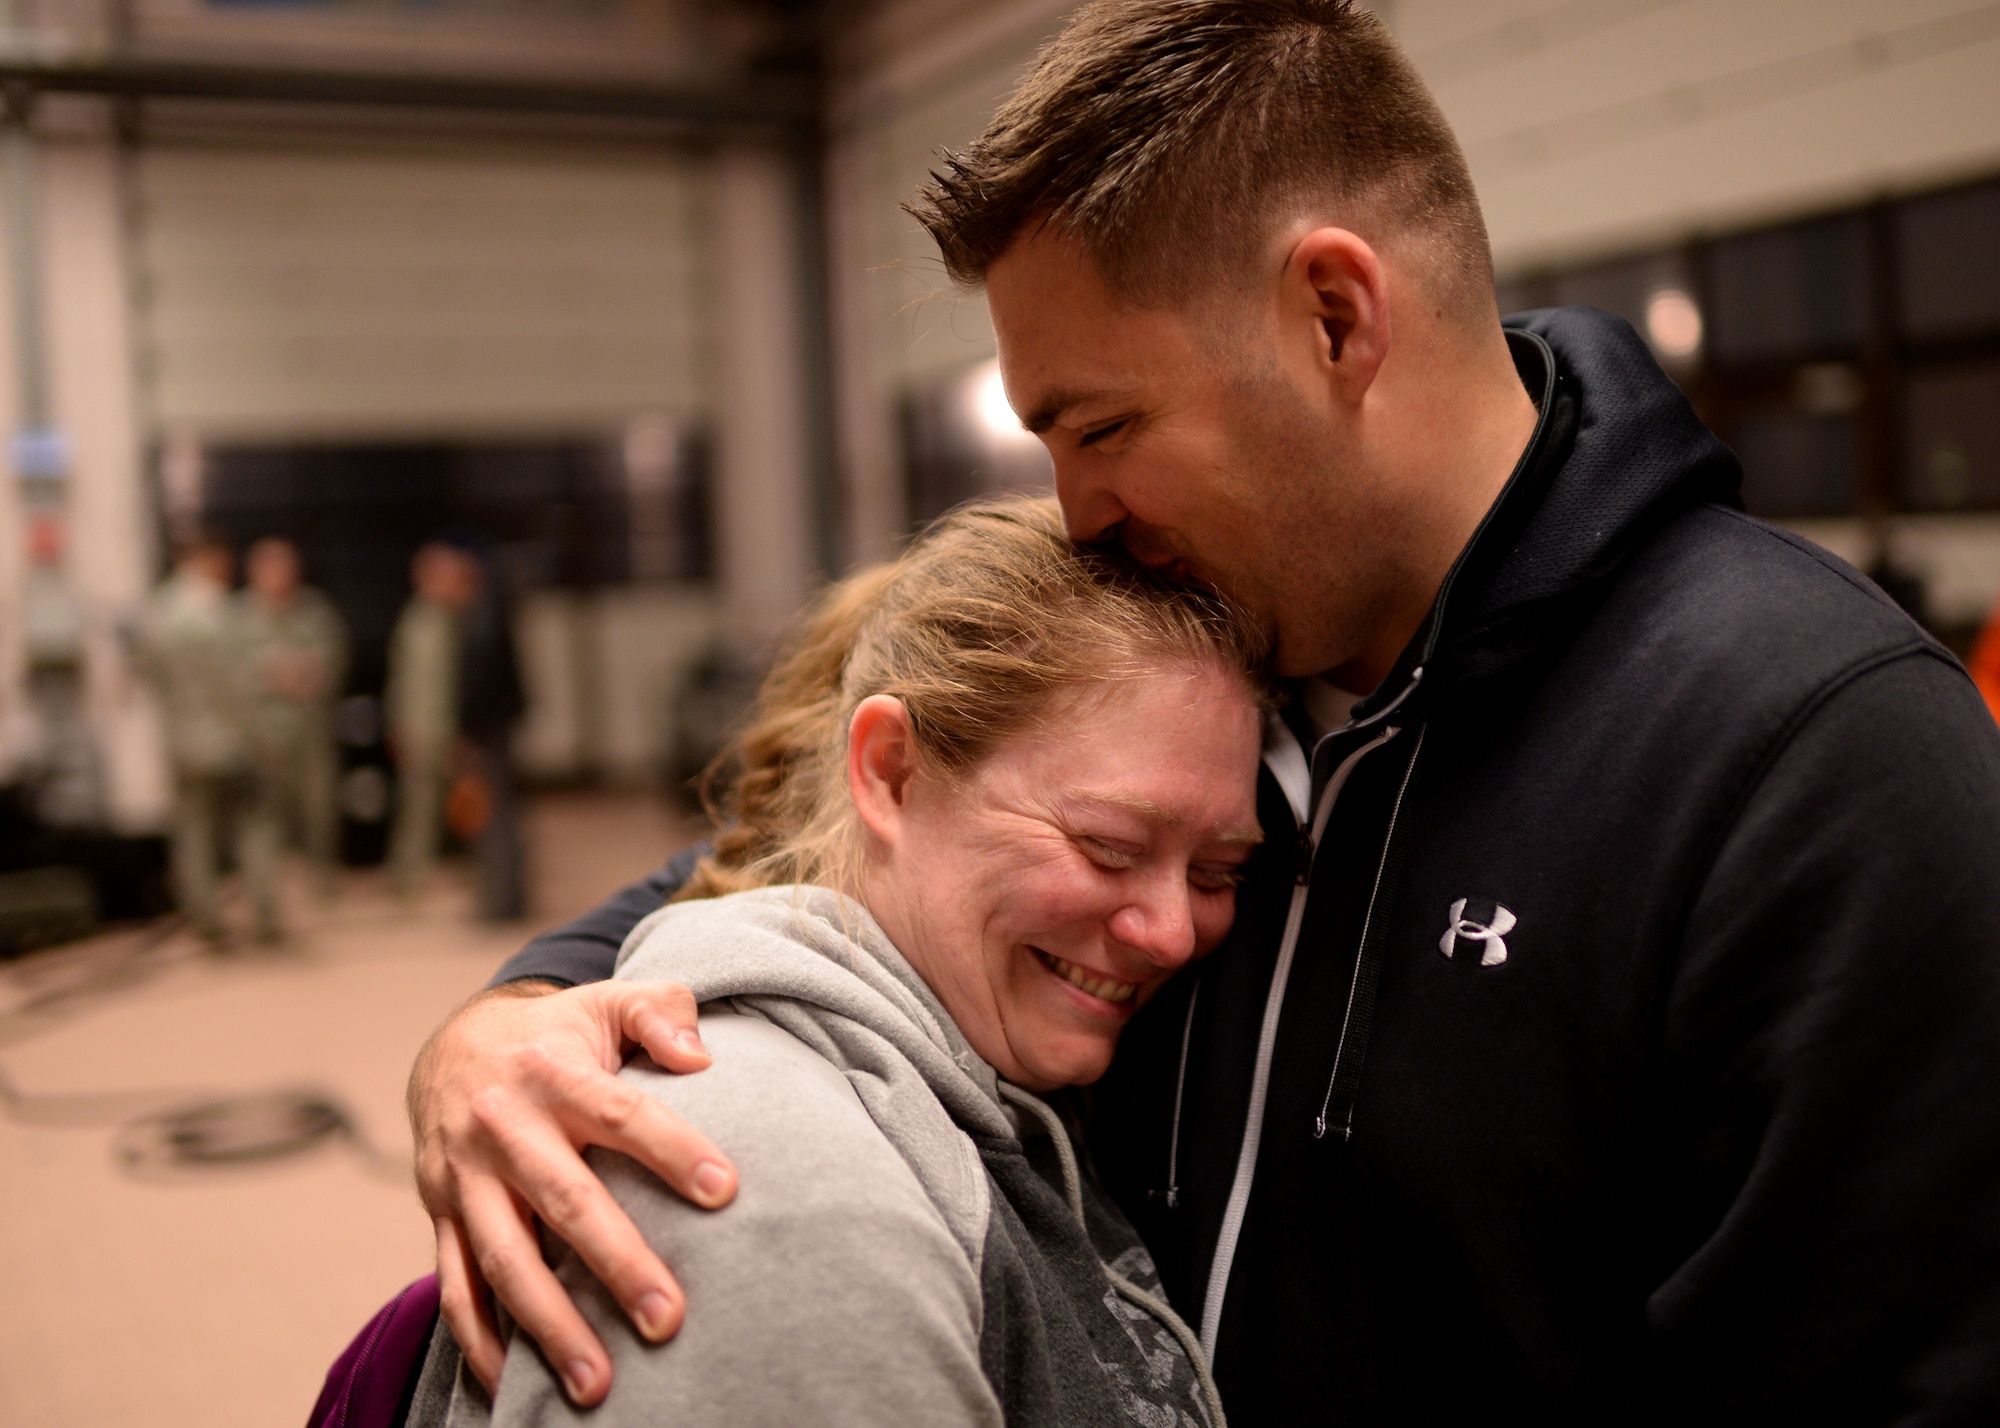 U.S. Air Force Capt. Bryan Grigas, right, 606th Air Control Squadron, comforts his wife, Terra, Oct. 7, 2014, at Spangdahlem Air Base, Germany, prior to his deployment to Southwest Asia. The squadron Airmen maintain equipment worth more than $170 million to provide airspace control to combatant commanders. (U.S. Air Force photo by Staff Sgt. Daryl Knee/Released)